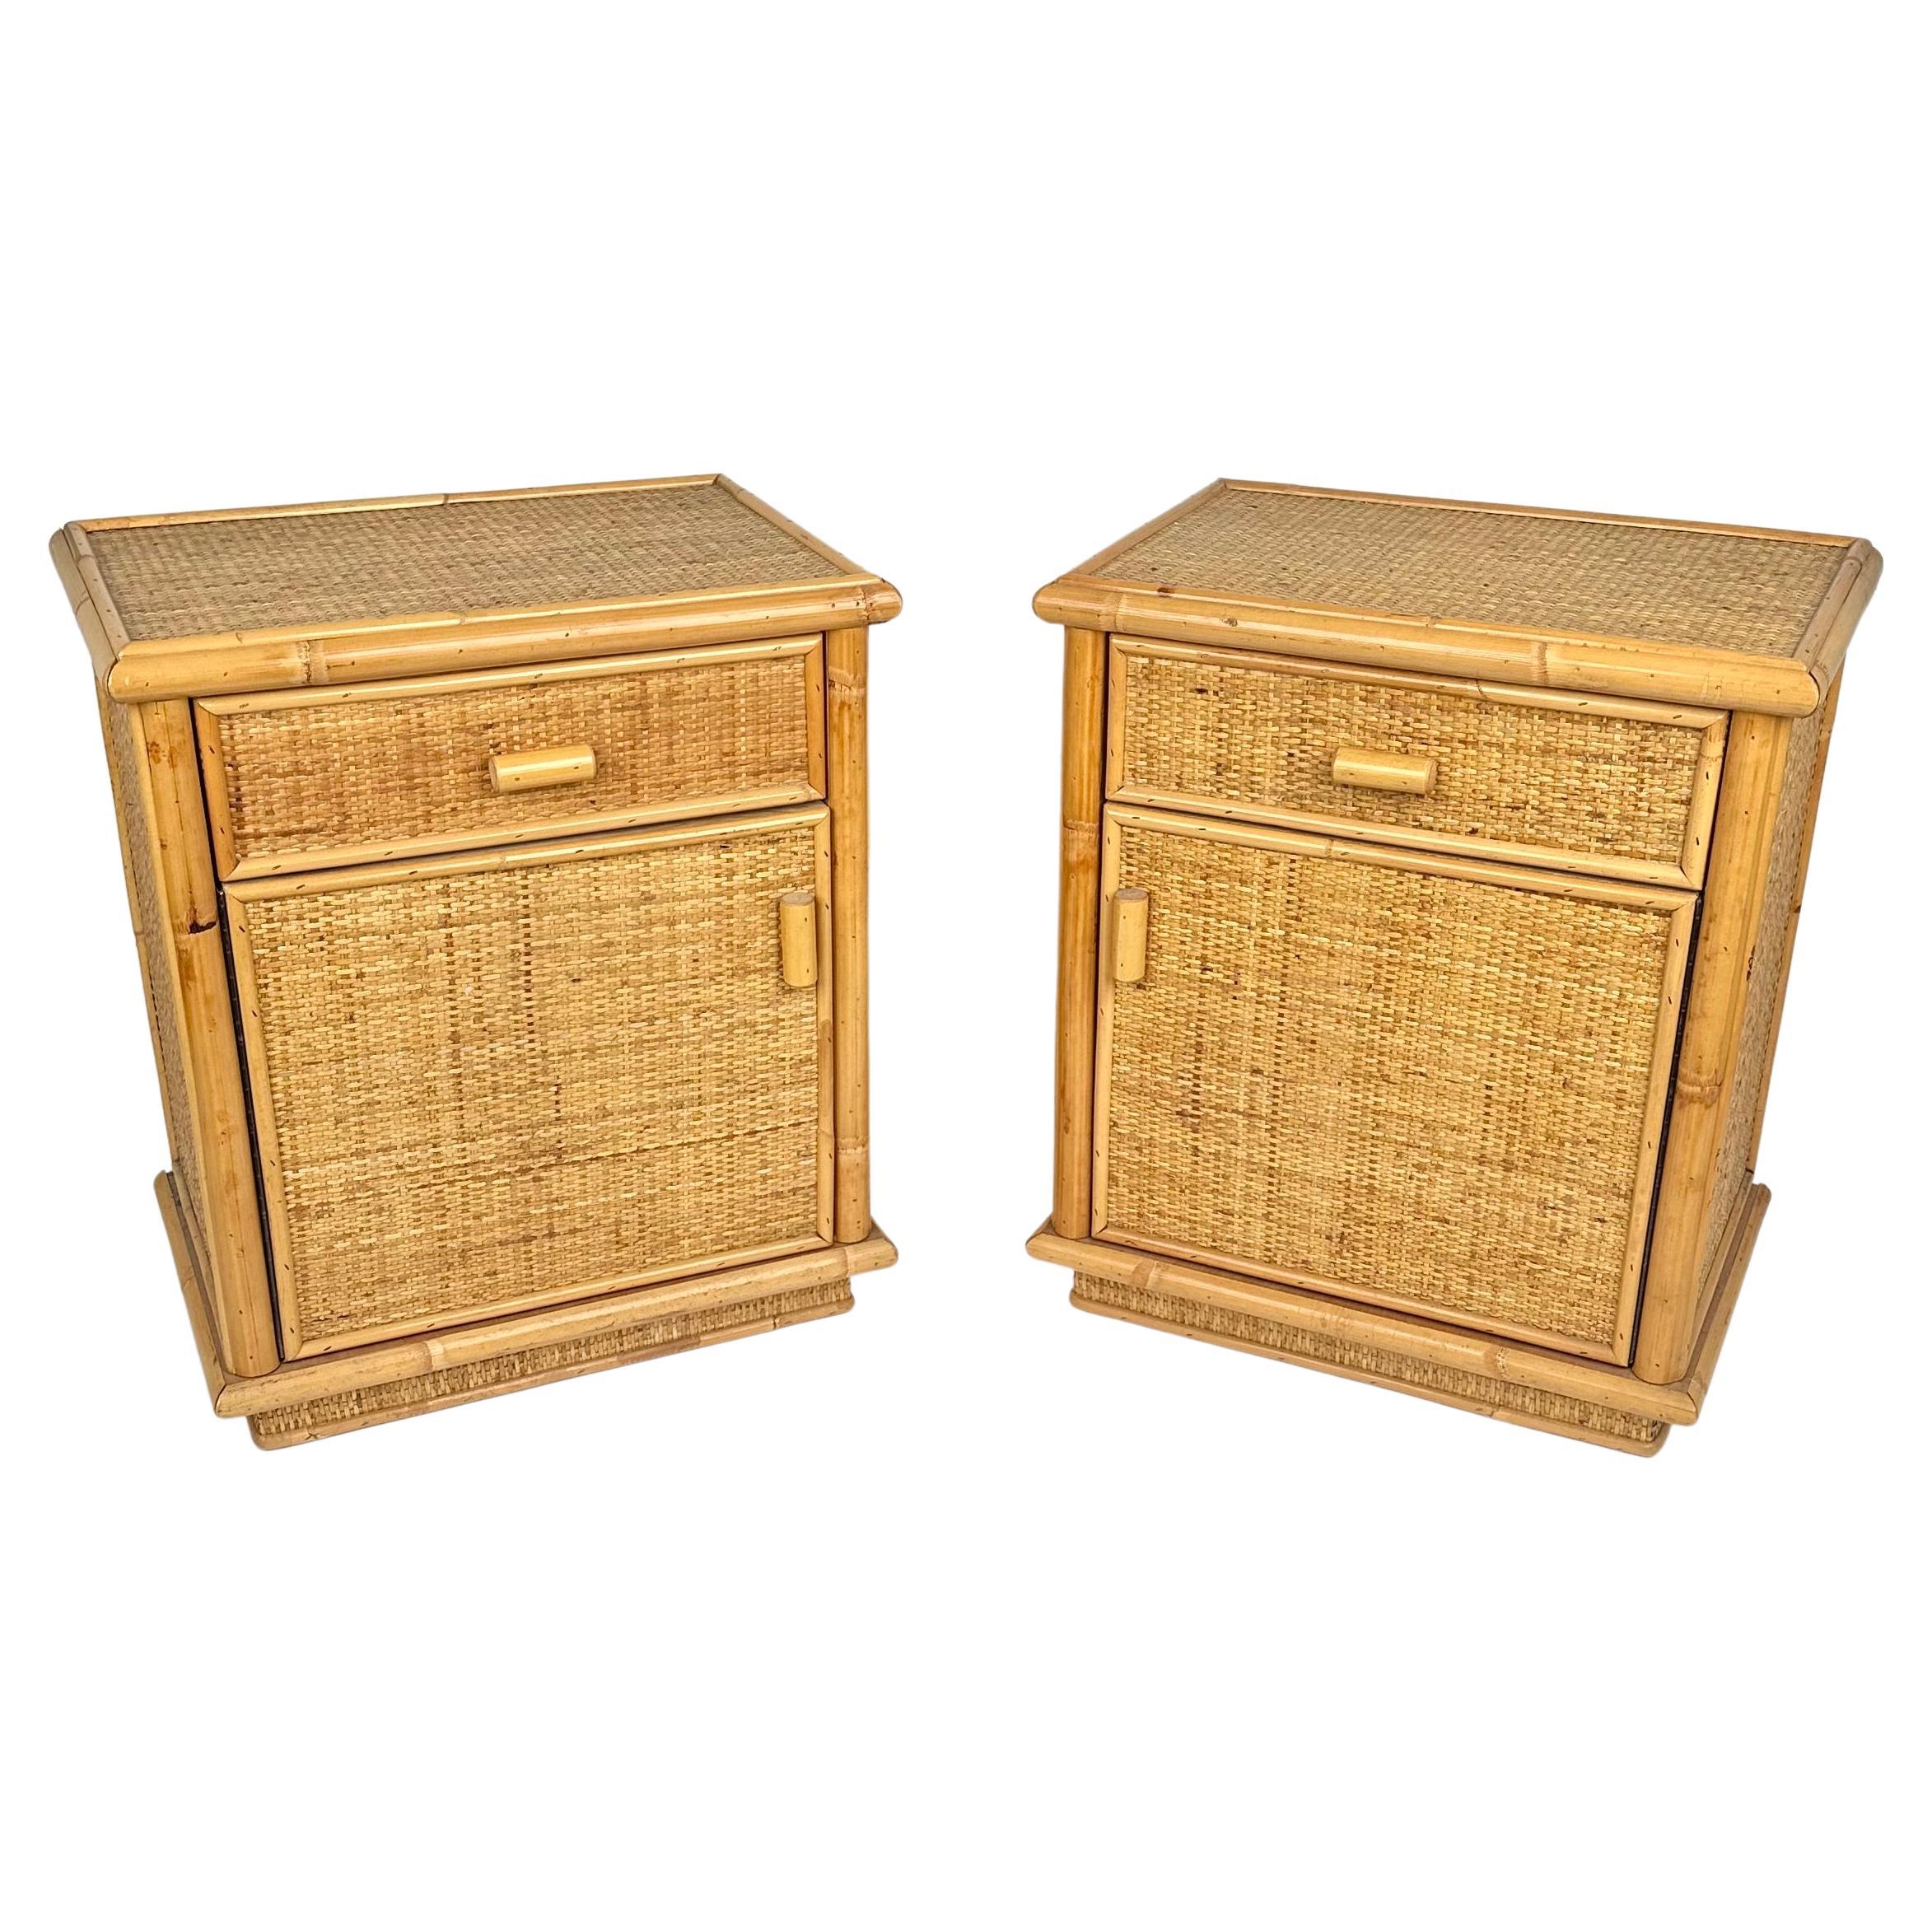 Midcentury Pair of Bed Side Tables Nightstands in Bamboo & Rattan, Italy, 1970s For Sale 8